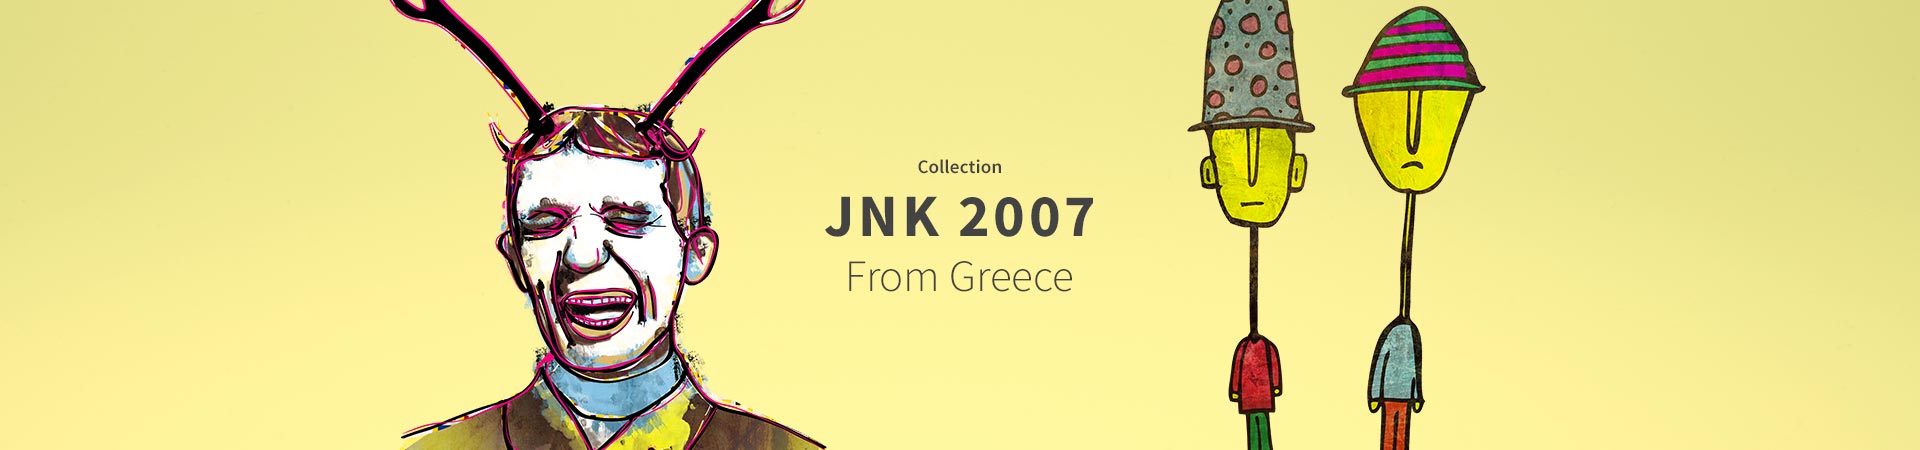 Collection JNK2007